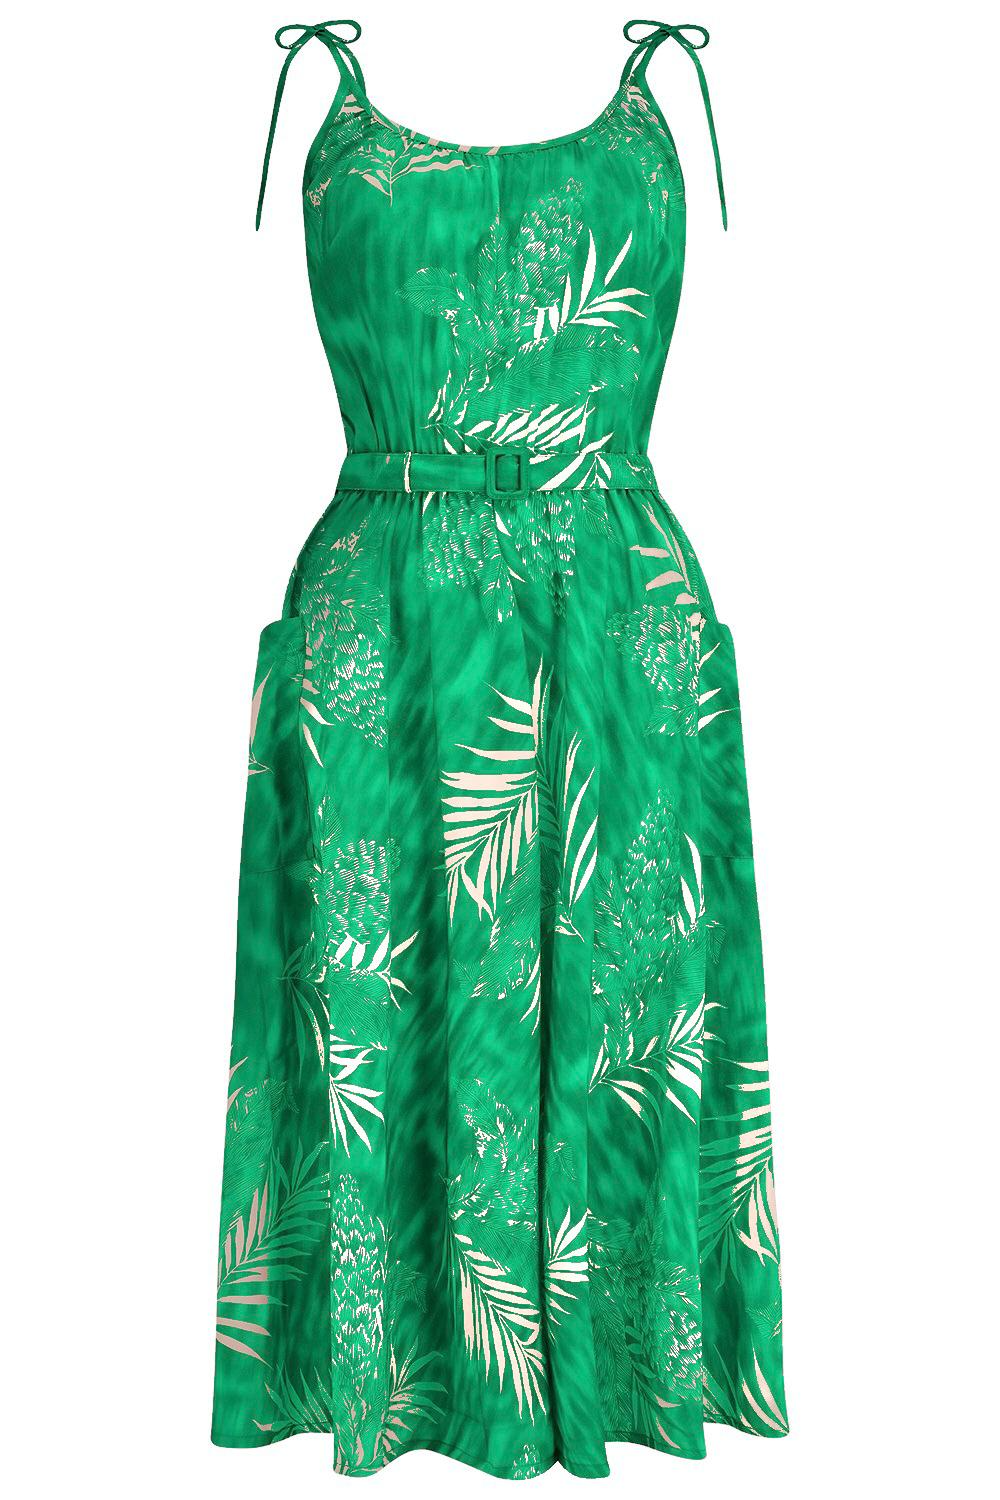 **Sample Sale** The "Suzy Sun Dress" in Emerald Palm Print, Easy To Wear Tiki Style From The 50s